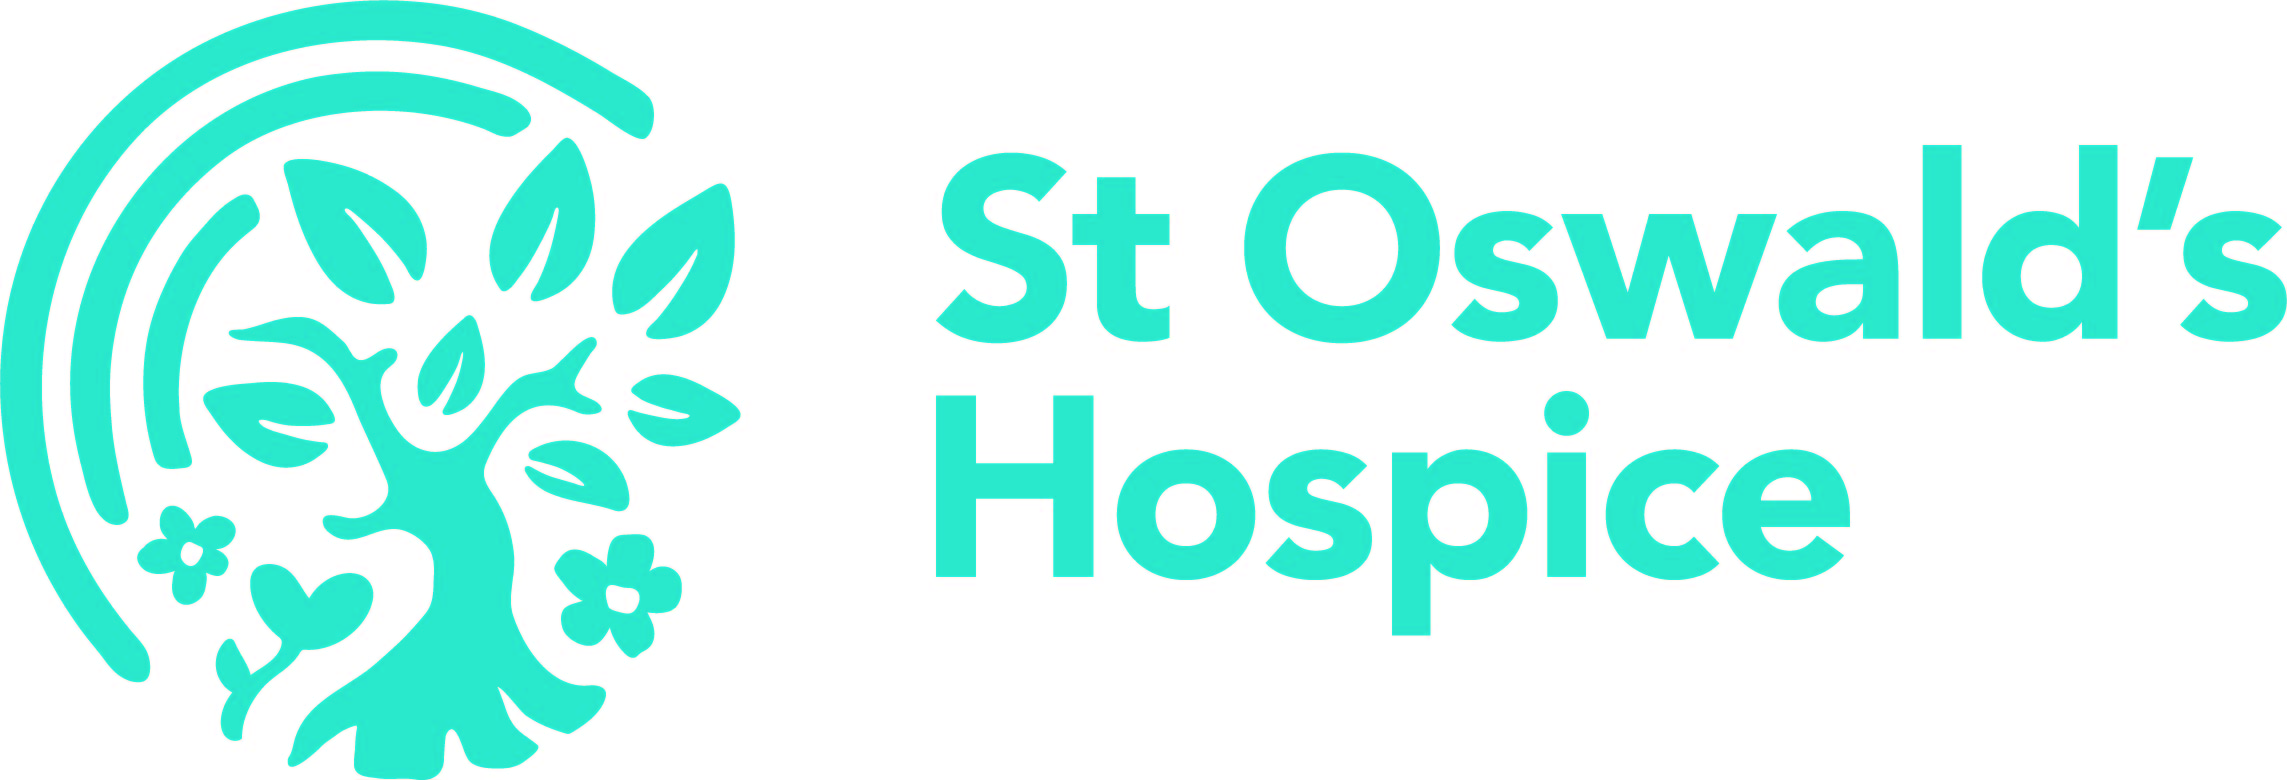 St Oswalds Hospice Limited - Directory - North East England Chamber of ...